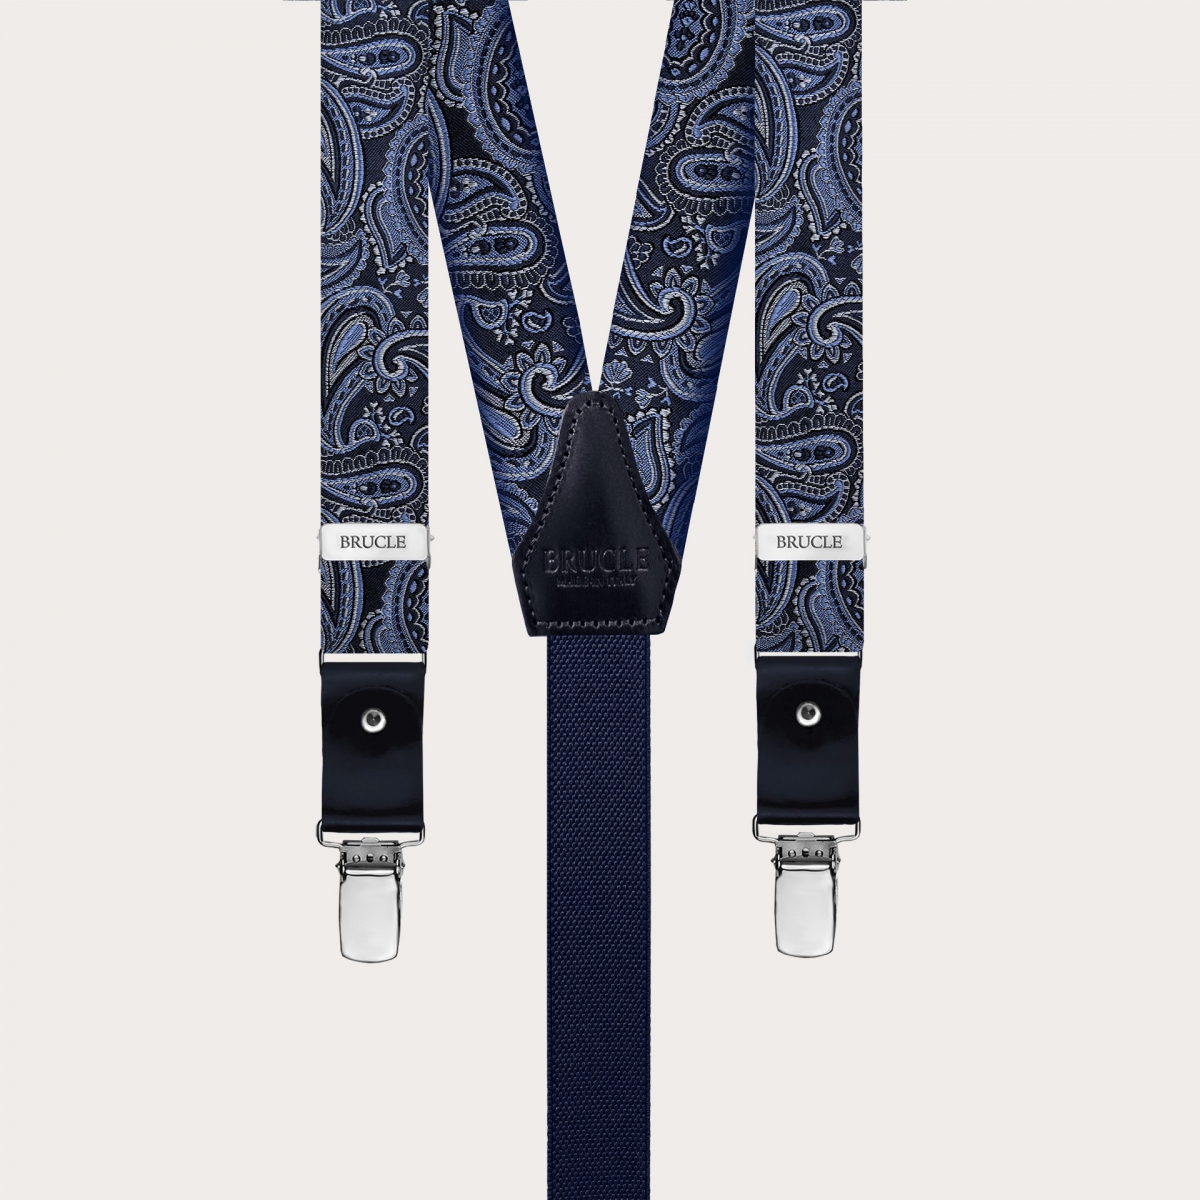 Narrow silk suspenders in blue paisley pattern for buttons or clips